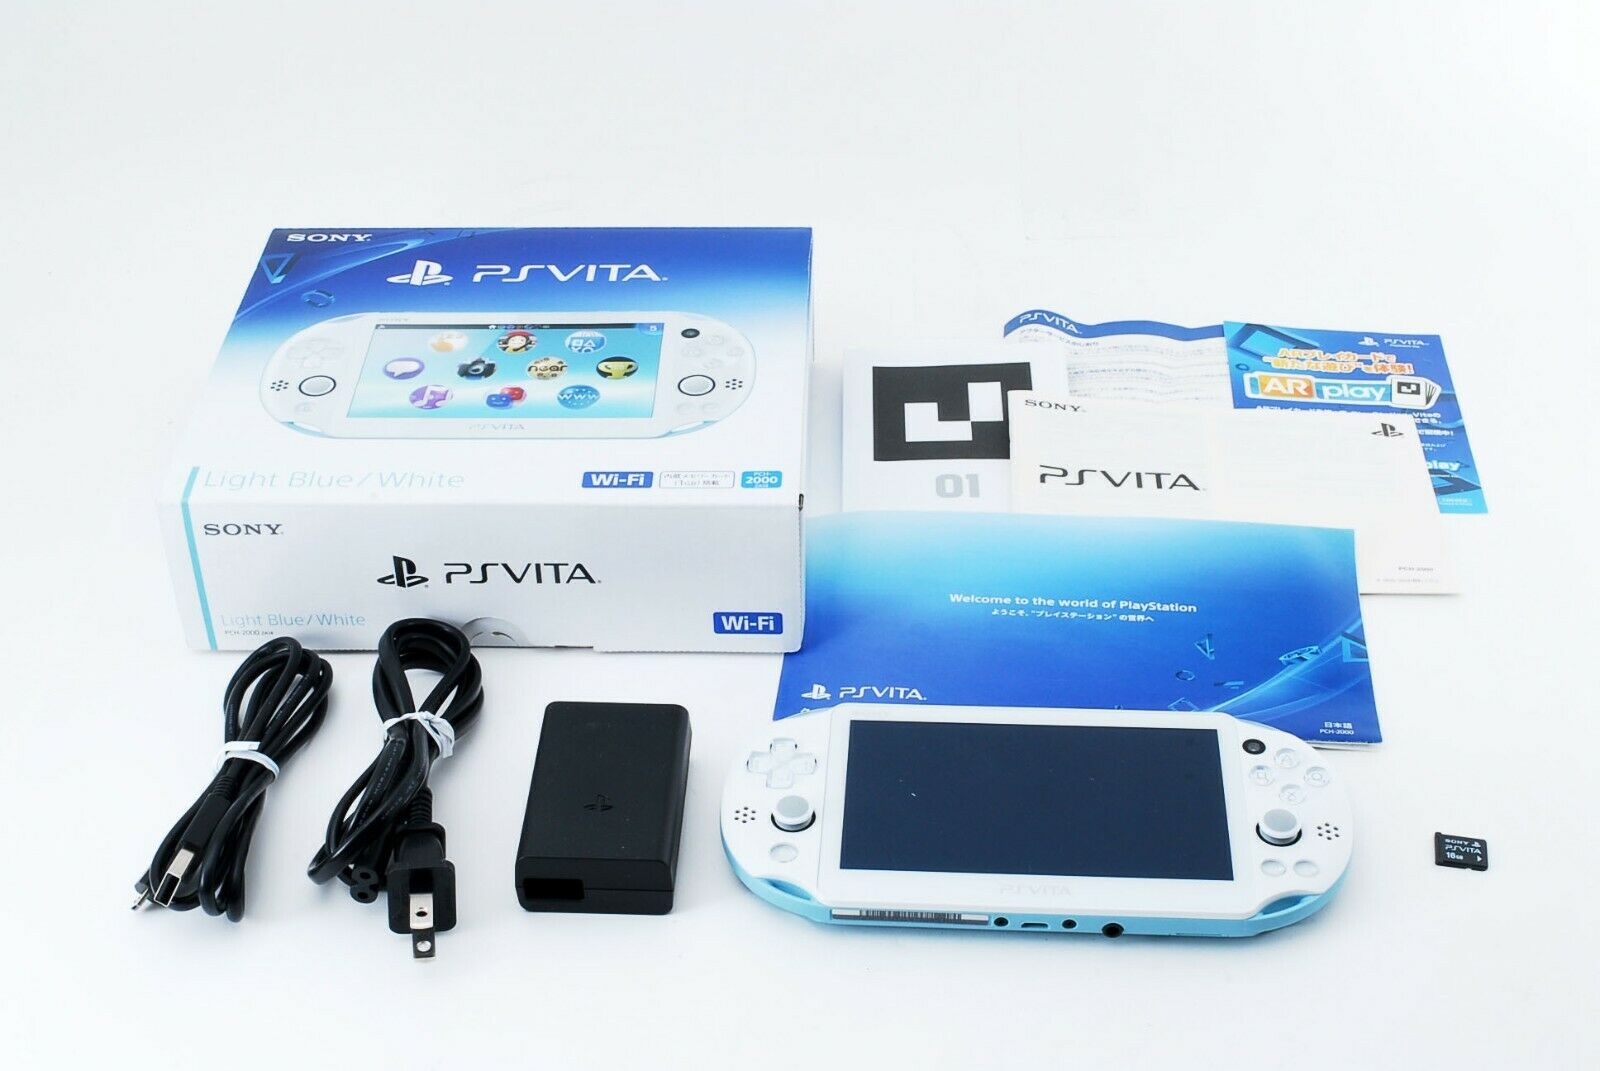 Sony PS Vita Gentle Blue White PCH-2000 w/ Charger and Field from Japan